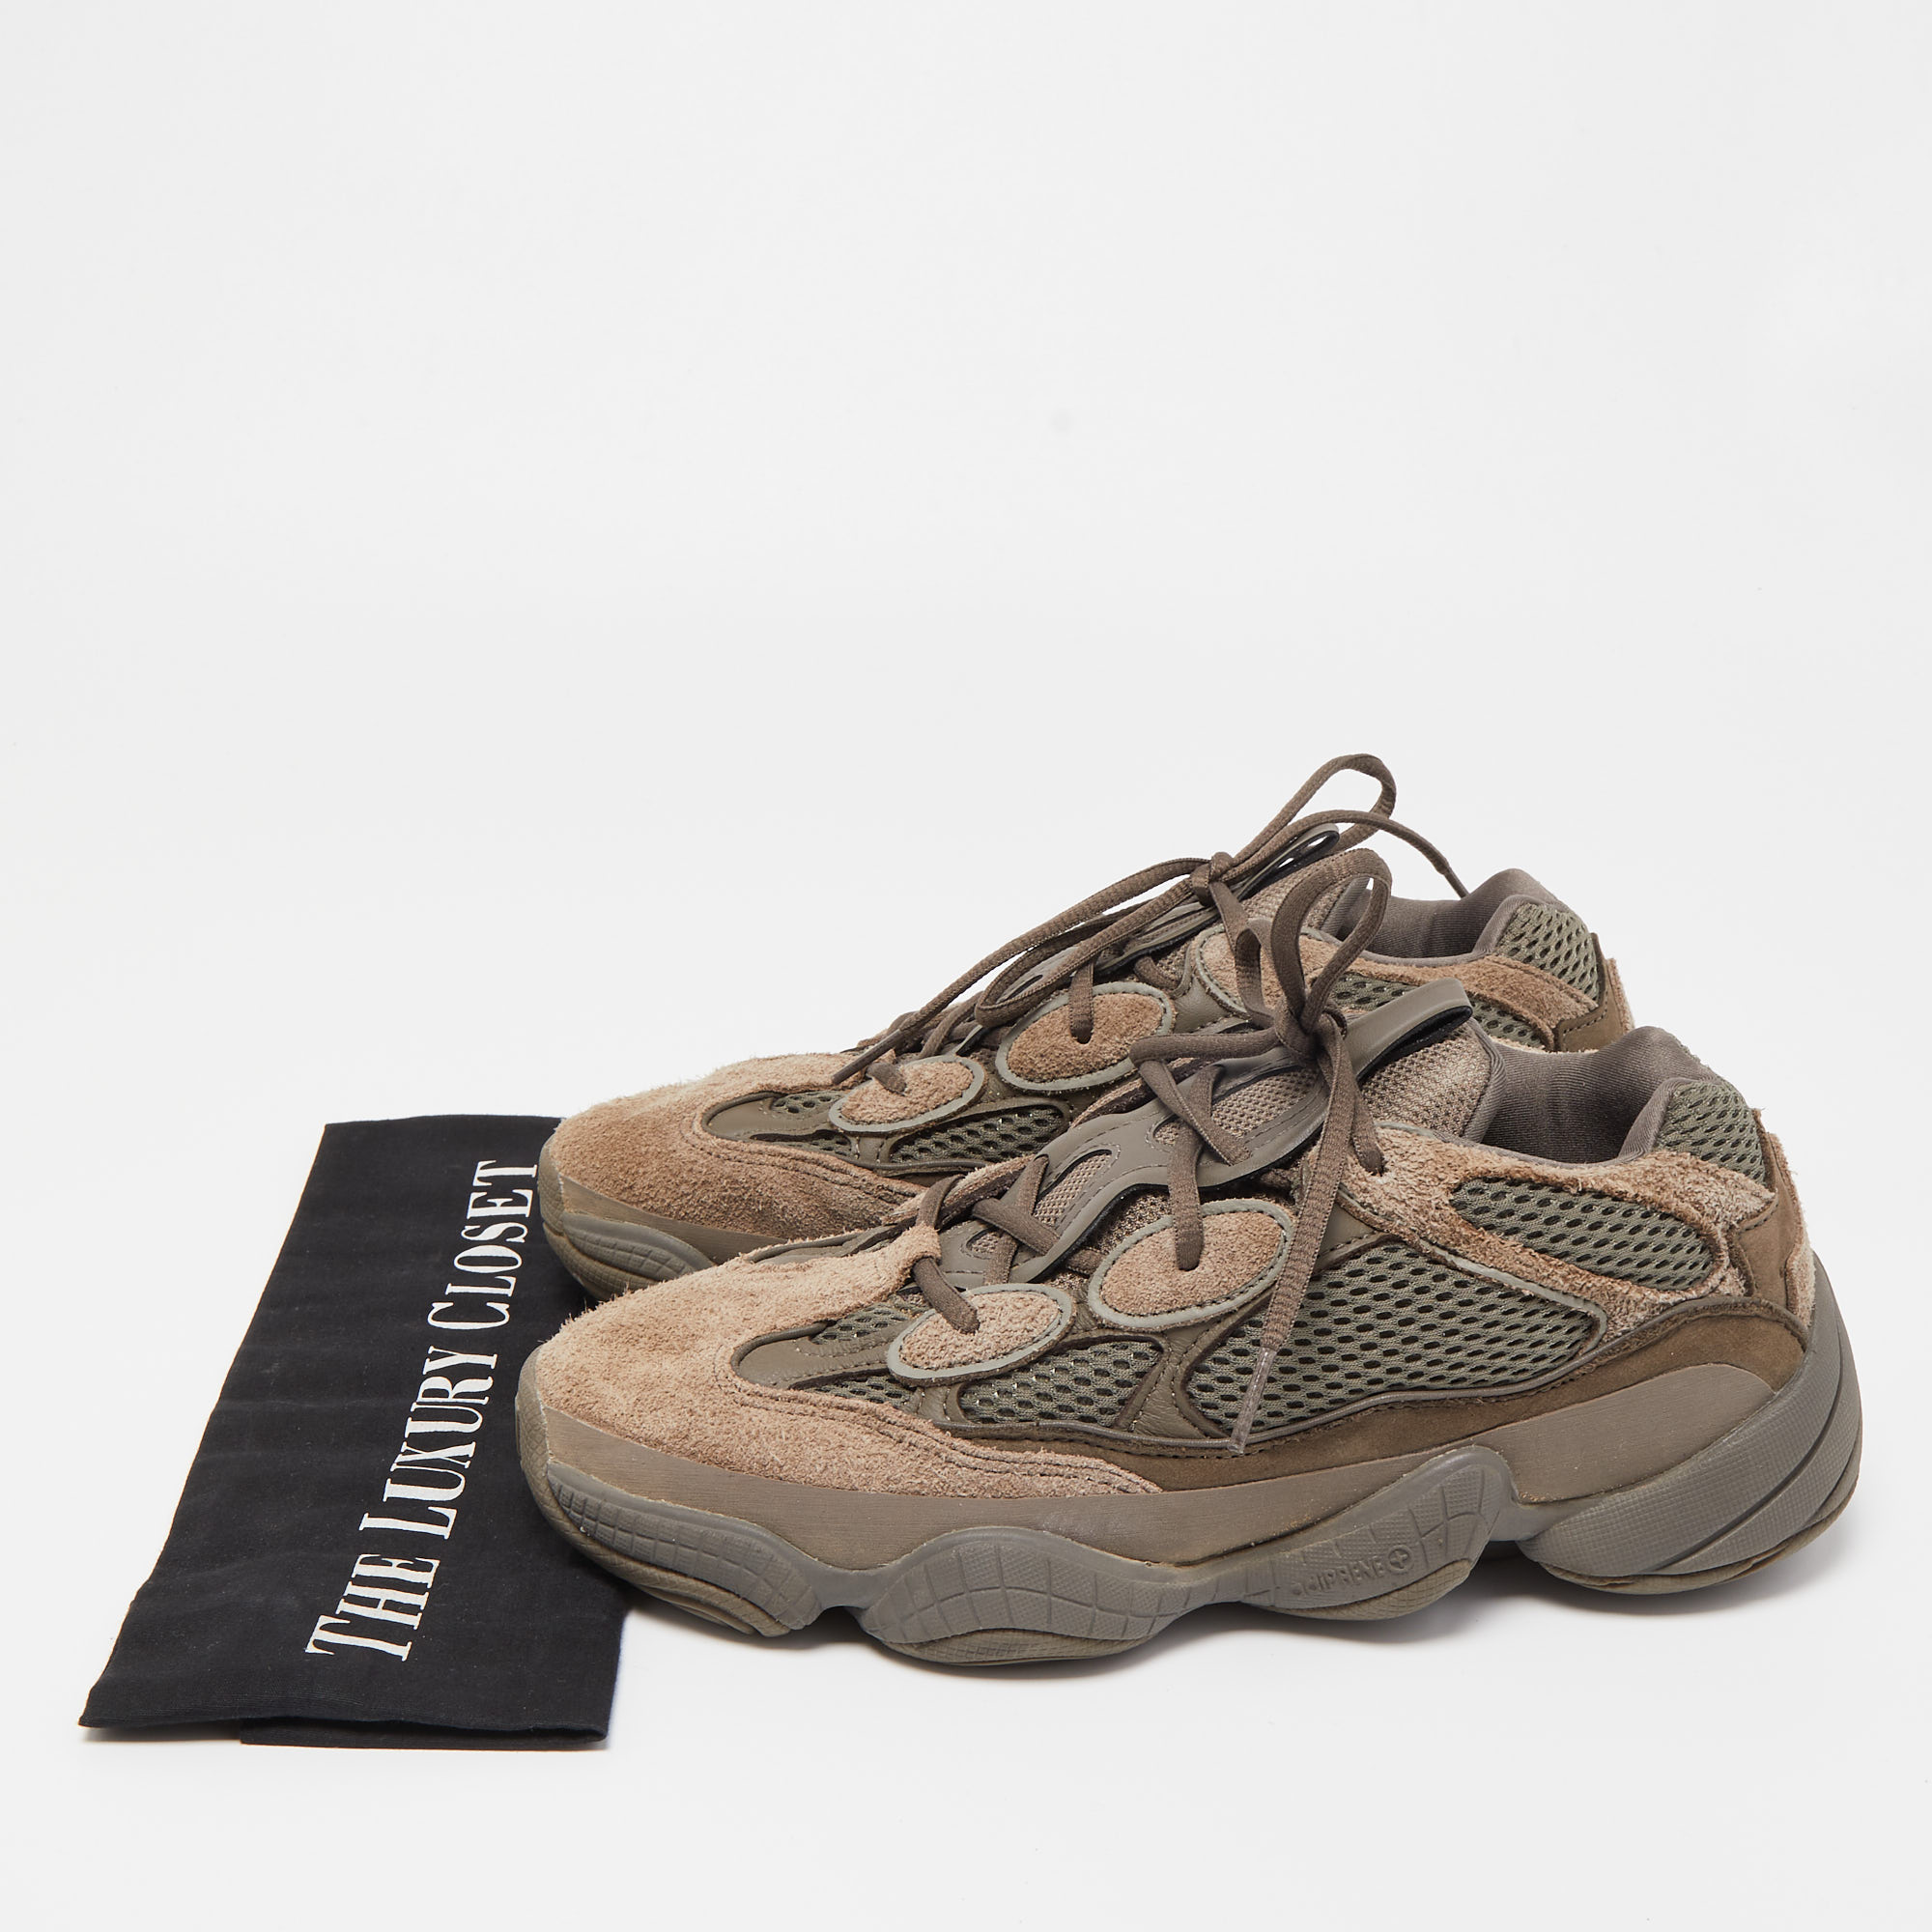 Yeezy X Adidas Brown Suede And Mesh Yeezy 500 Clay Sneakers Size 40 2/3